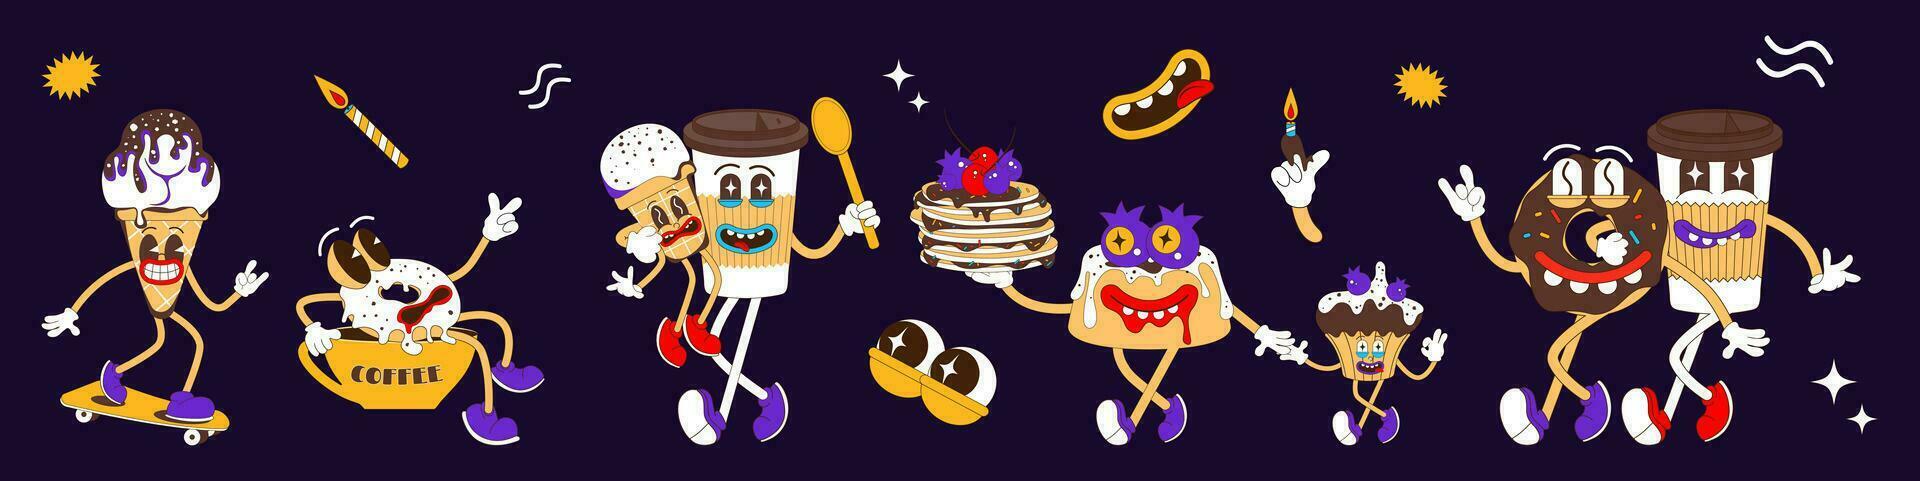 A set of funny stickers. Psychedelic sweets characters. Ice cream, donut, coffee, cupcake, Bundt cake, donut in coffee cup. Funny eyes and faces. Vector illustration of mascots in cartoon style.